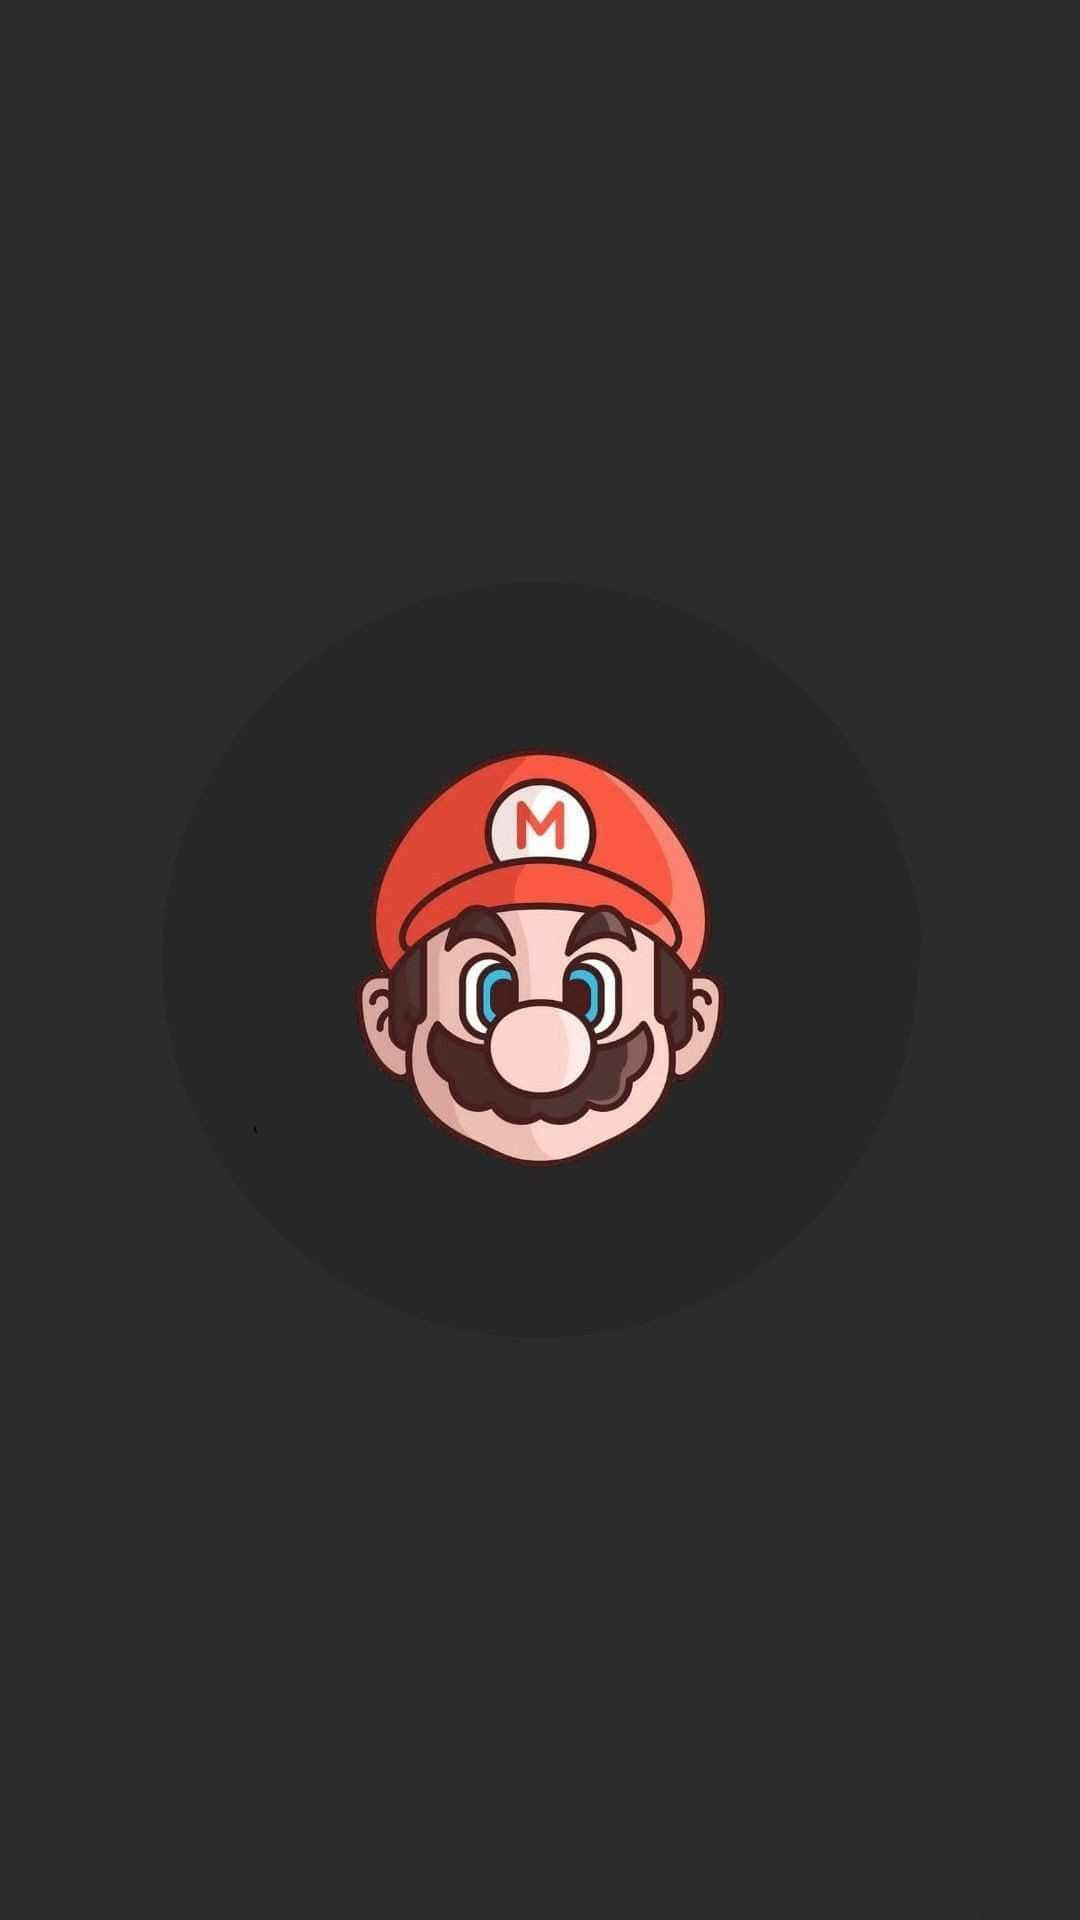 Mario The Cool Plumber Ready For Action. Background